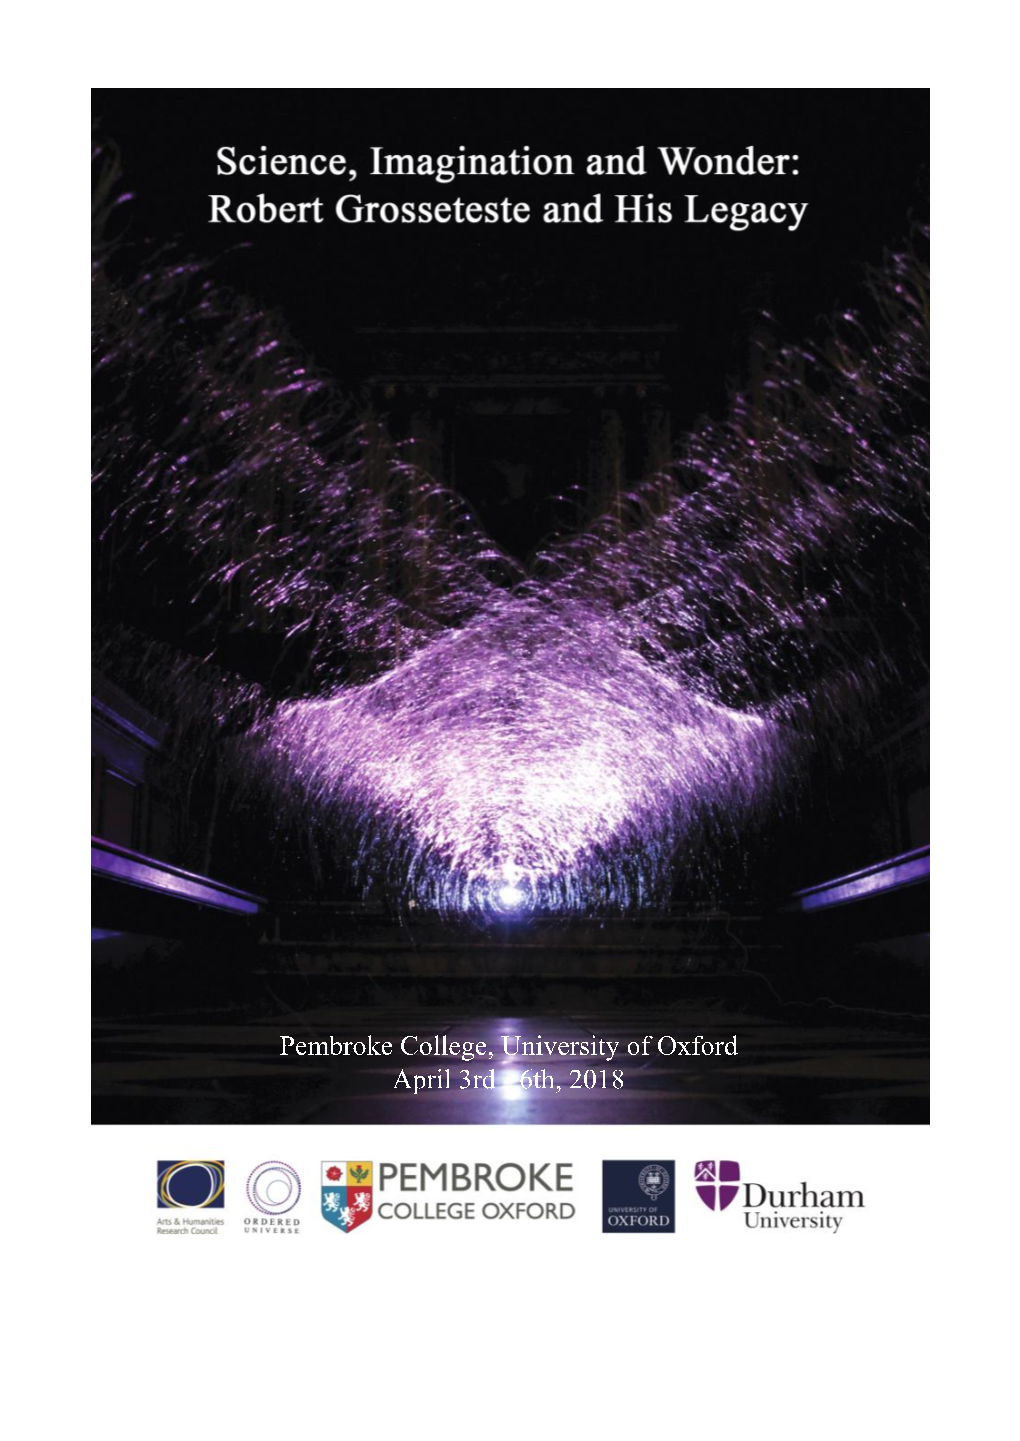 Here Diverse Disciplinary Perspectives Focus on Grosseteste’S Work